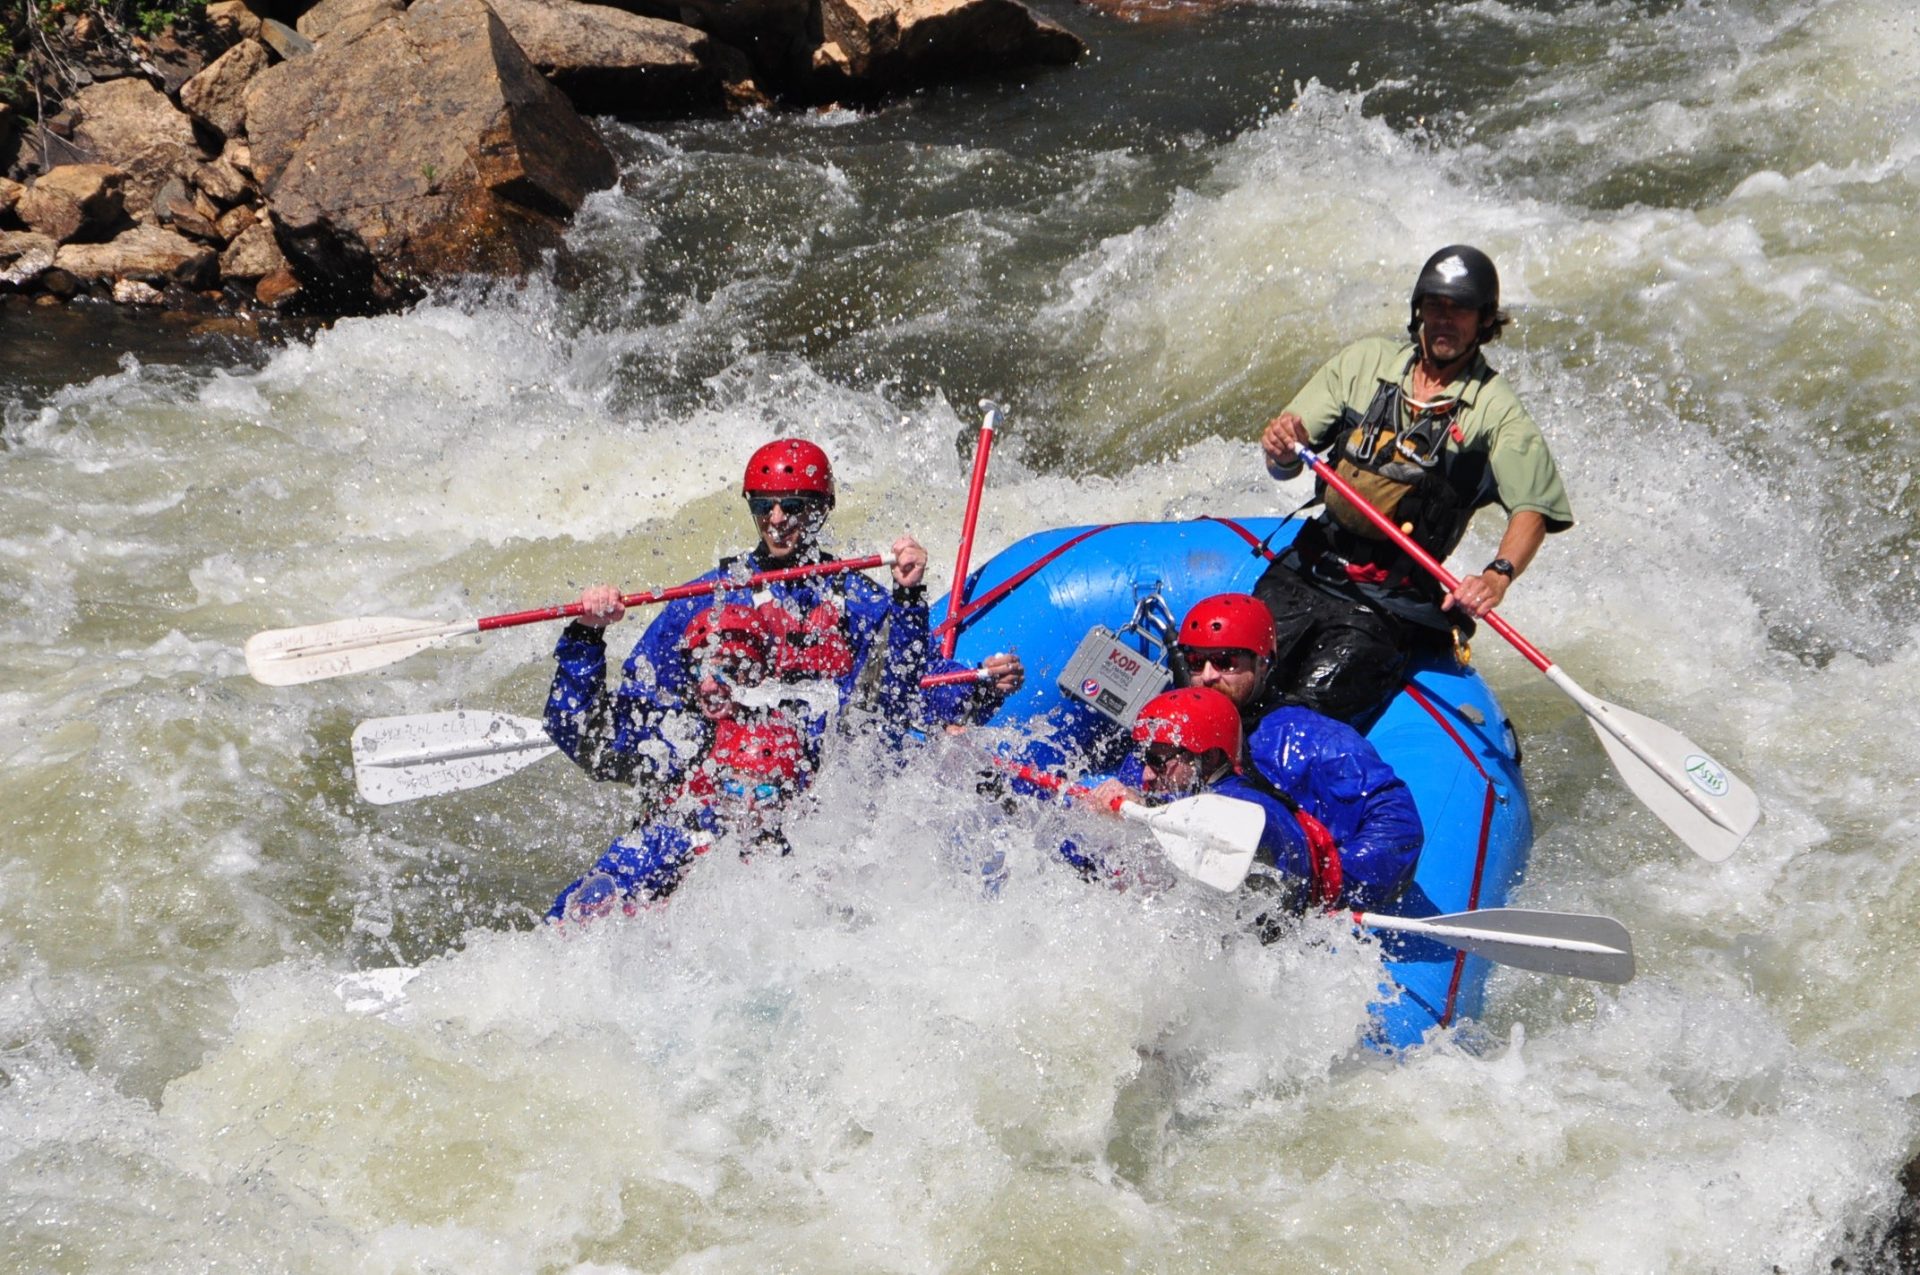 Tourists enjoy themselves while advanced whitewater rafting